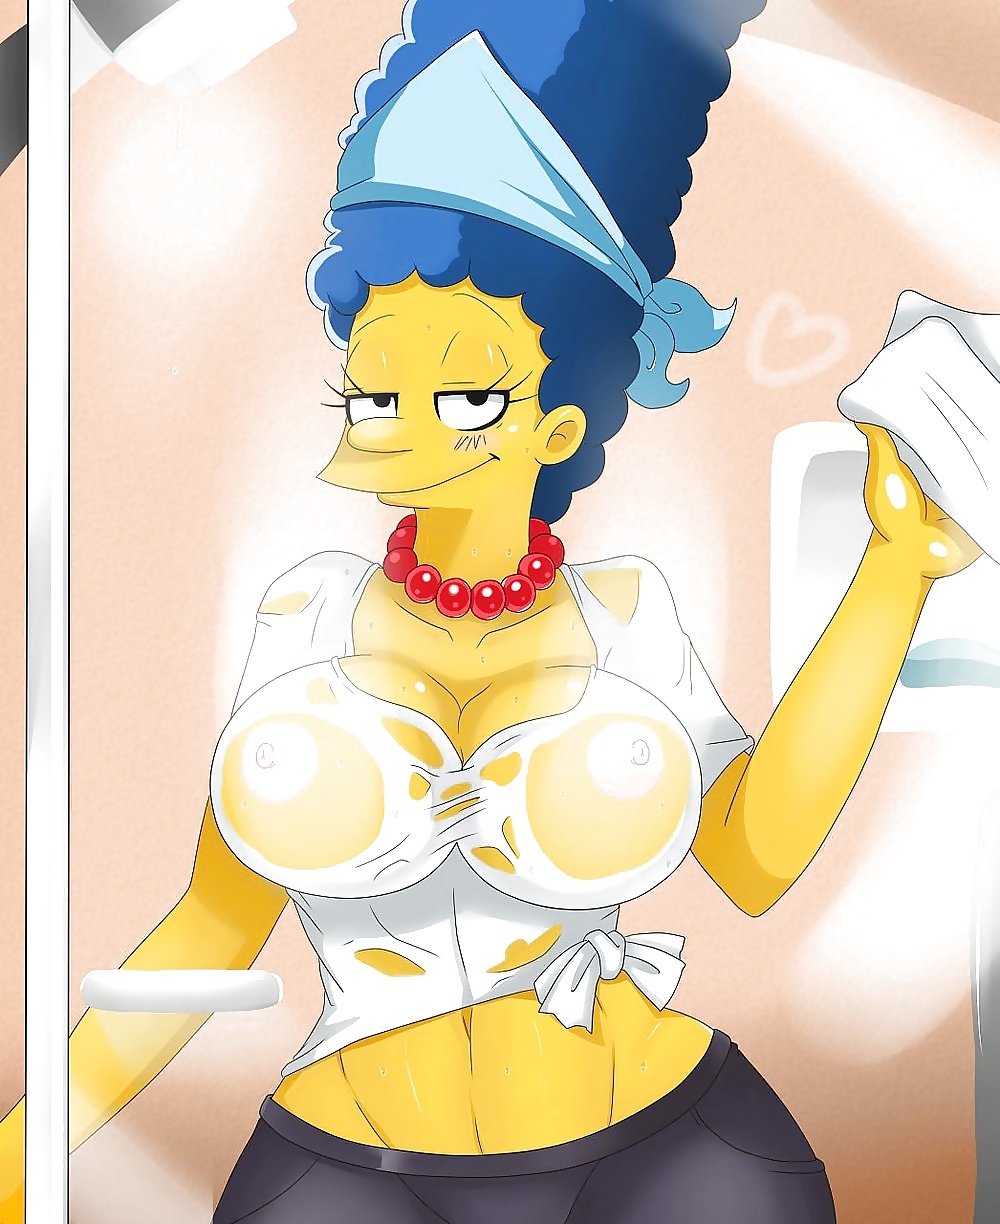 Marge S and Other's 2